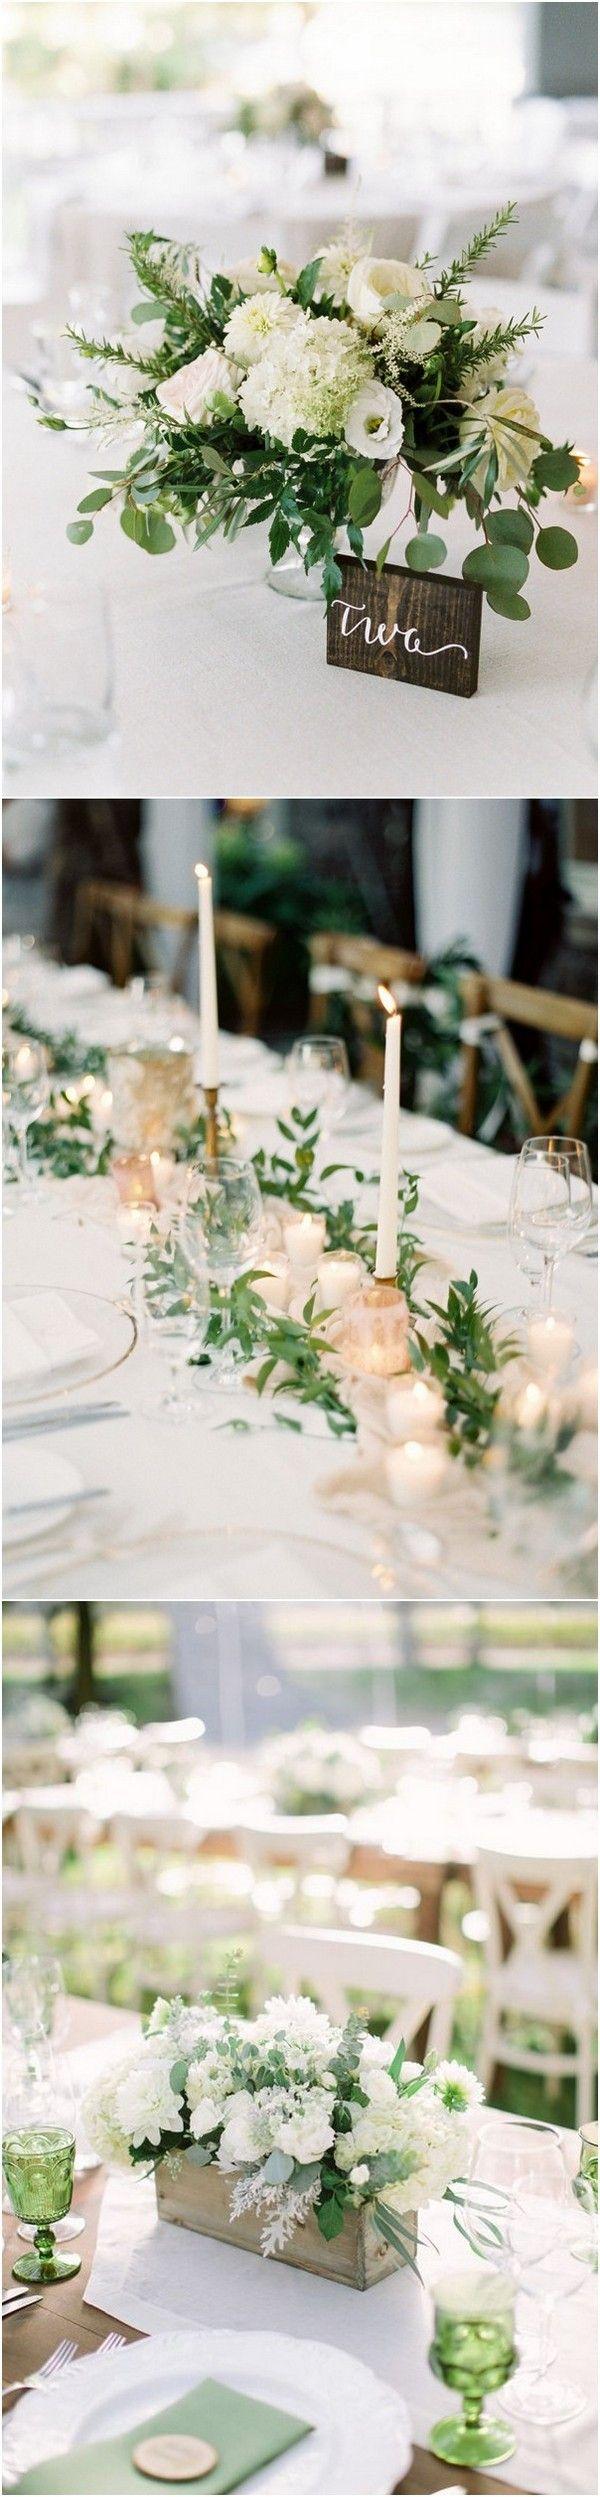 Mariage - Trending-20 Chic White And Green Wedding Centerpiece Ideas - Page 2 Of 3